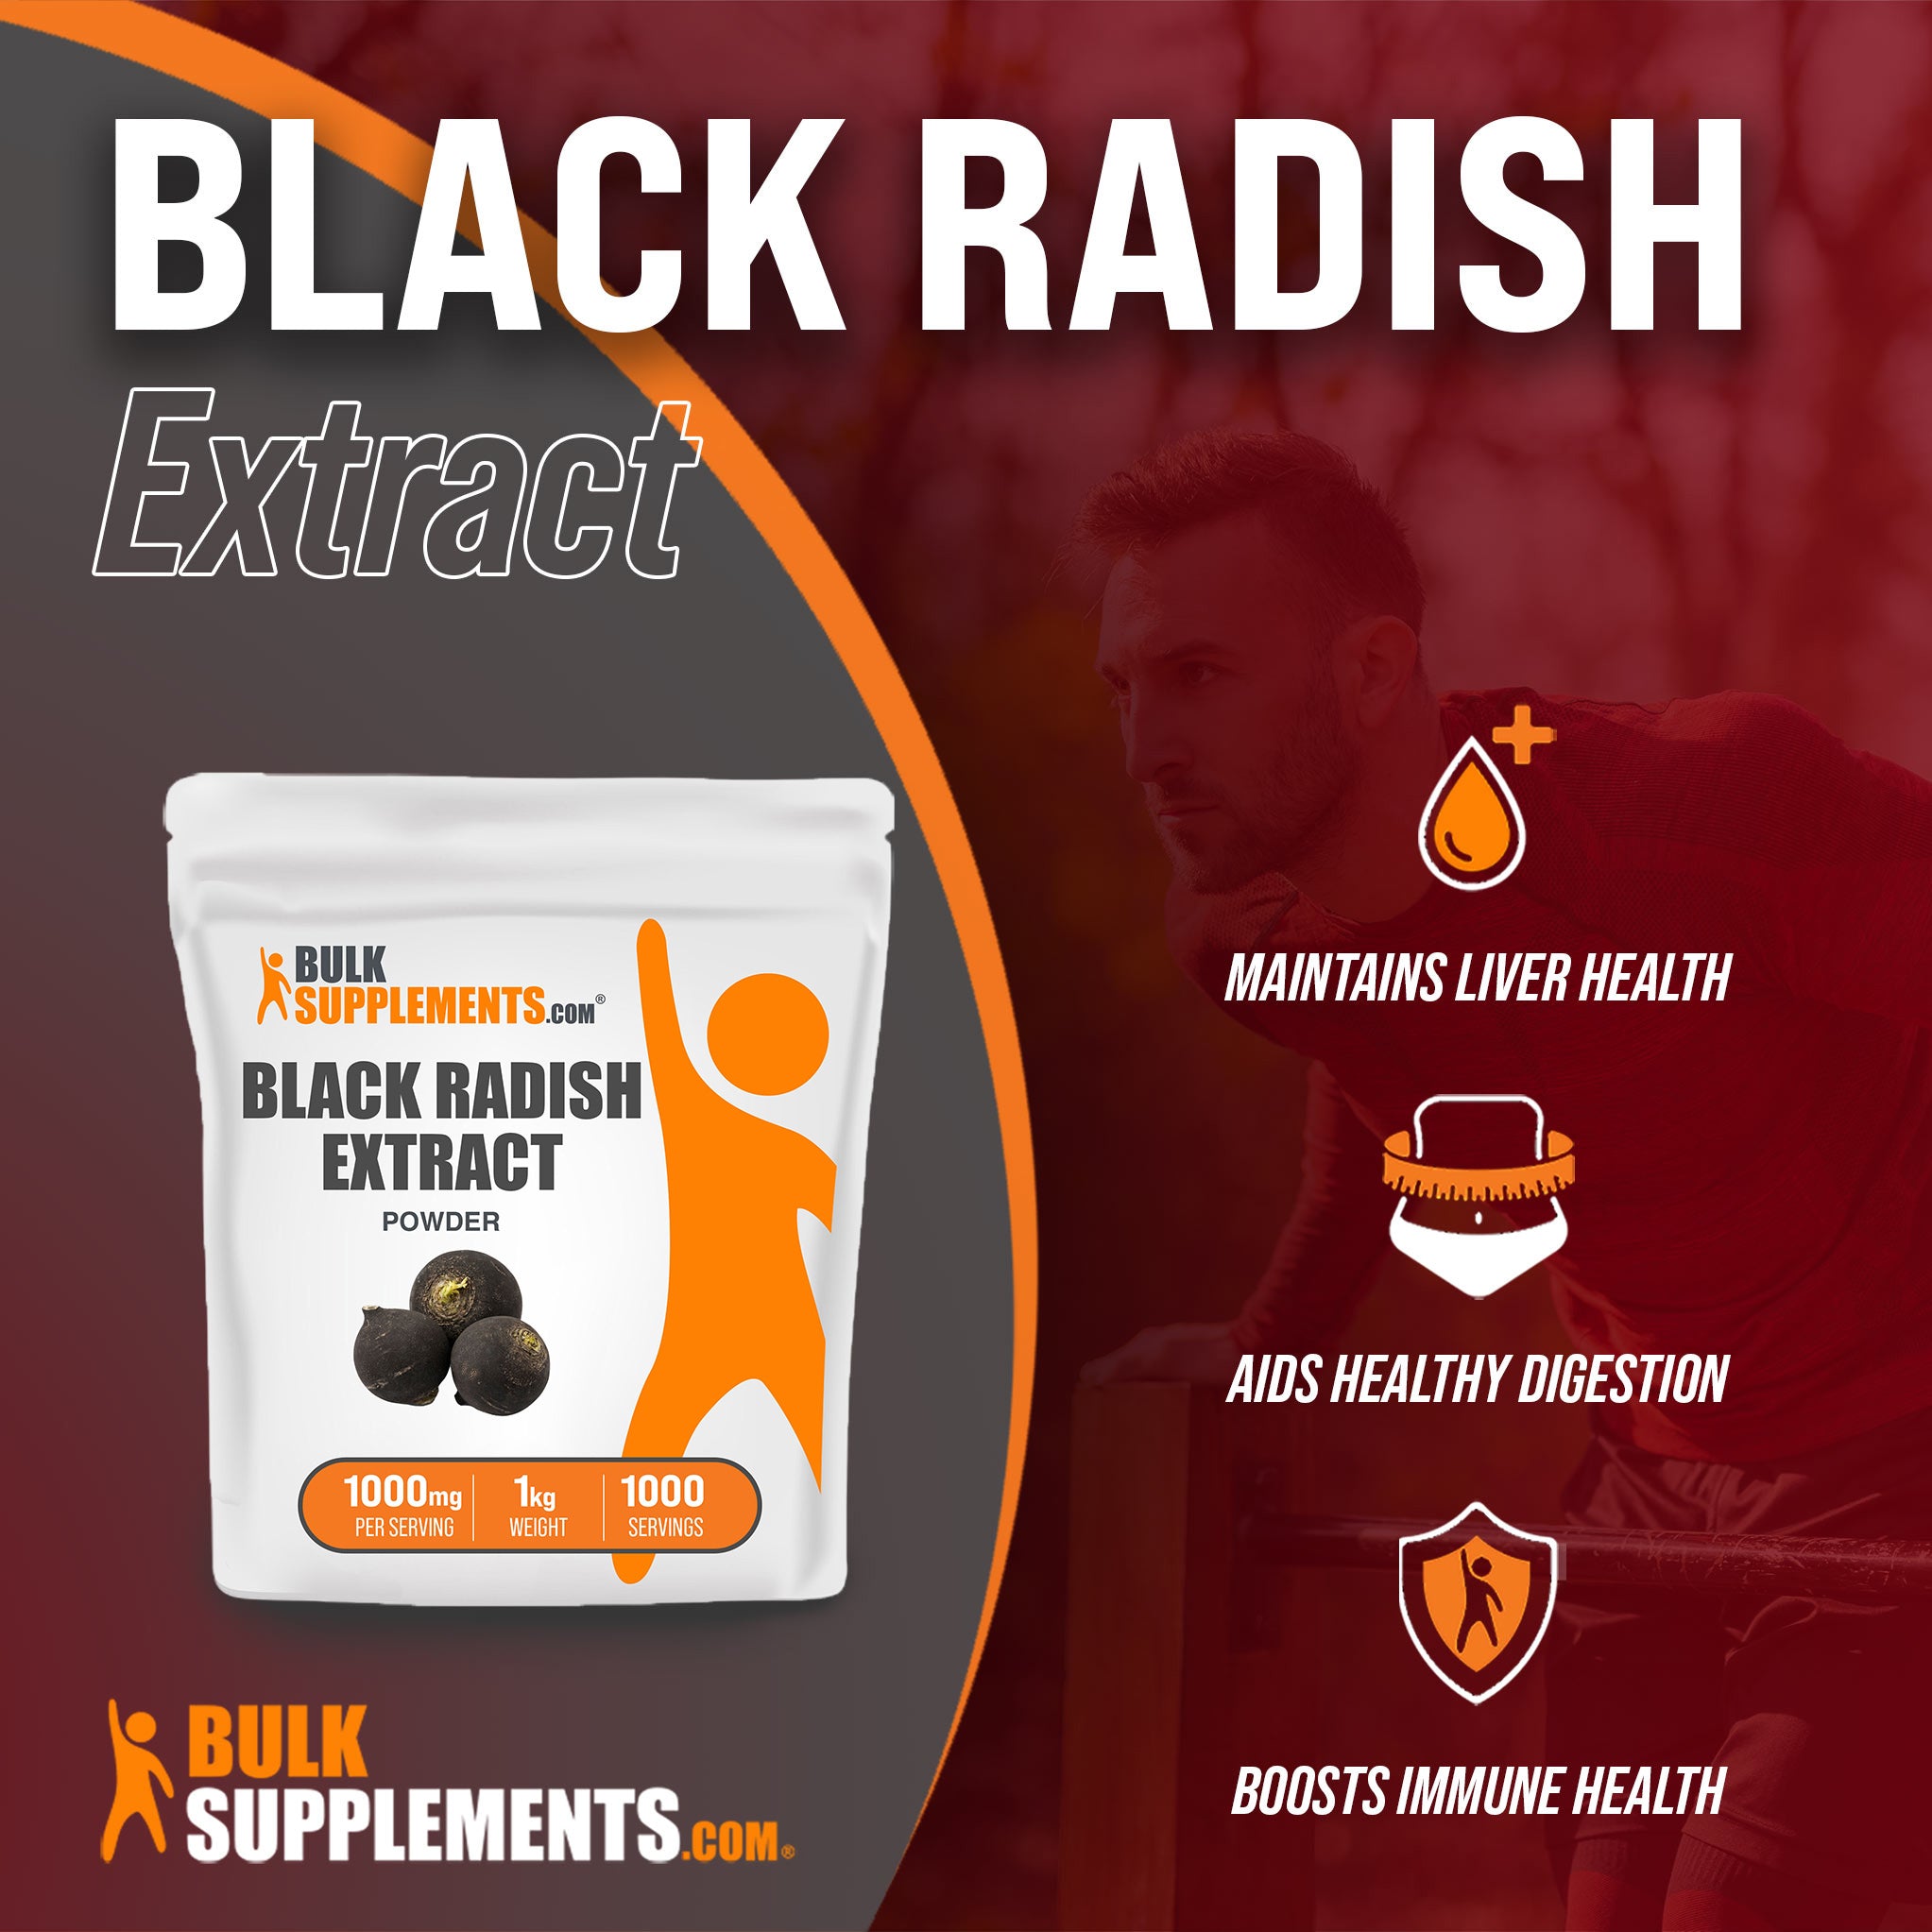 1kg of Black Radish Extract is an ideal liver supplement